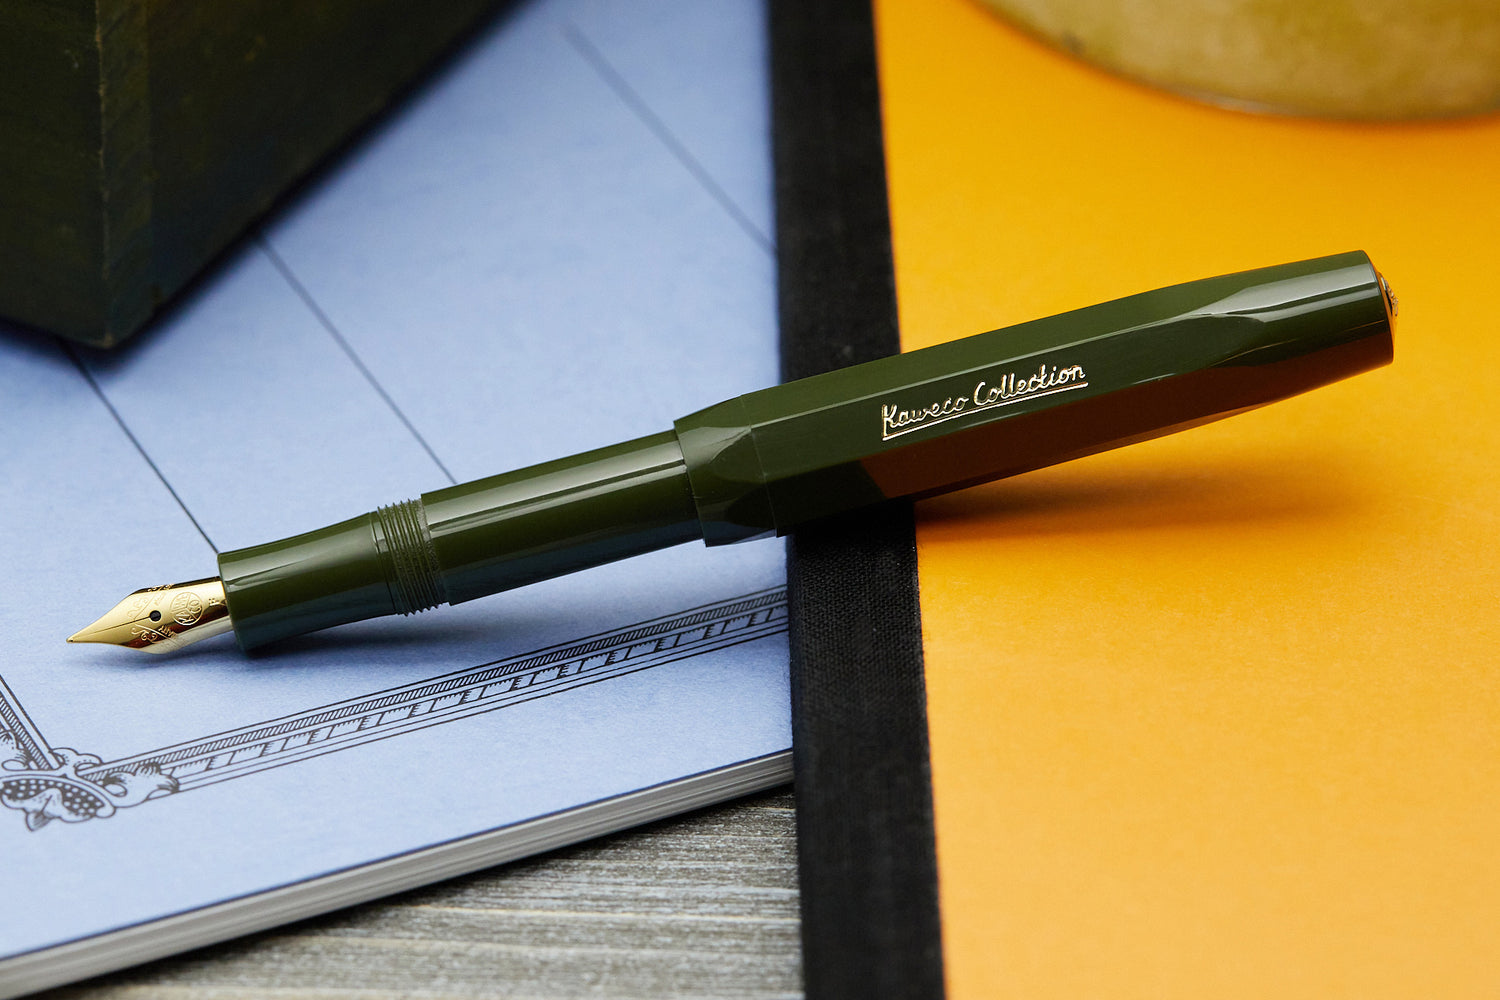 Kaweco Collection Sport Fountain Pen in Dark Olive